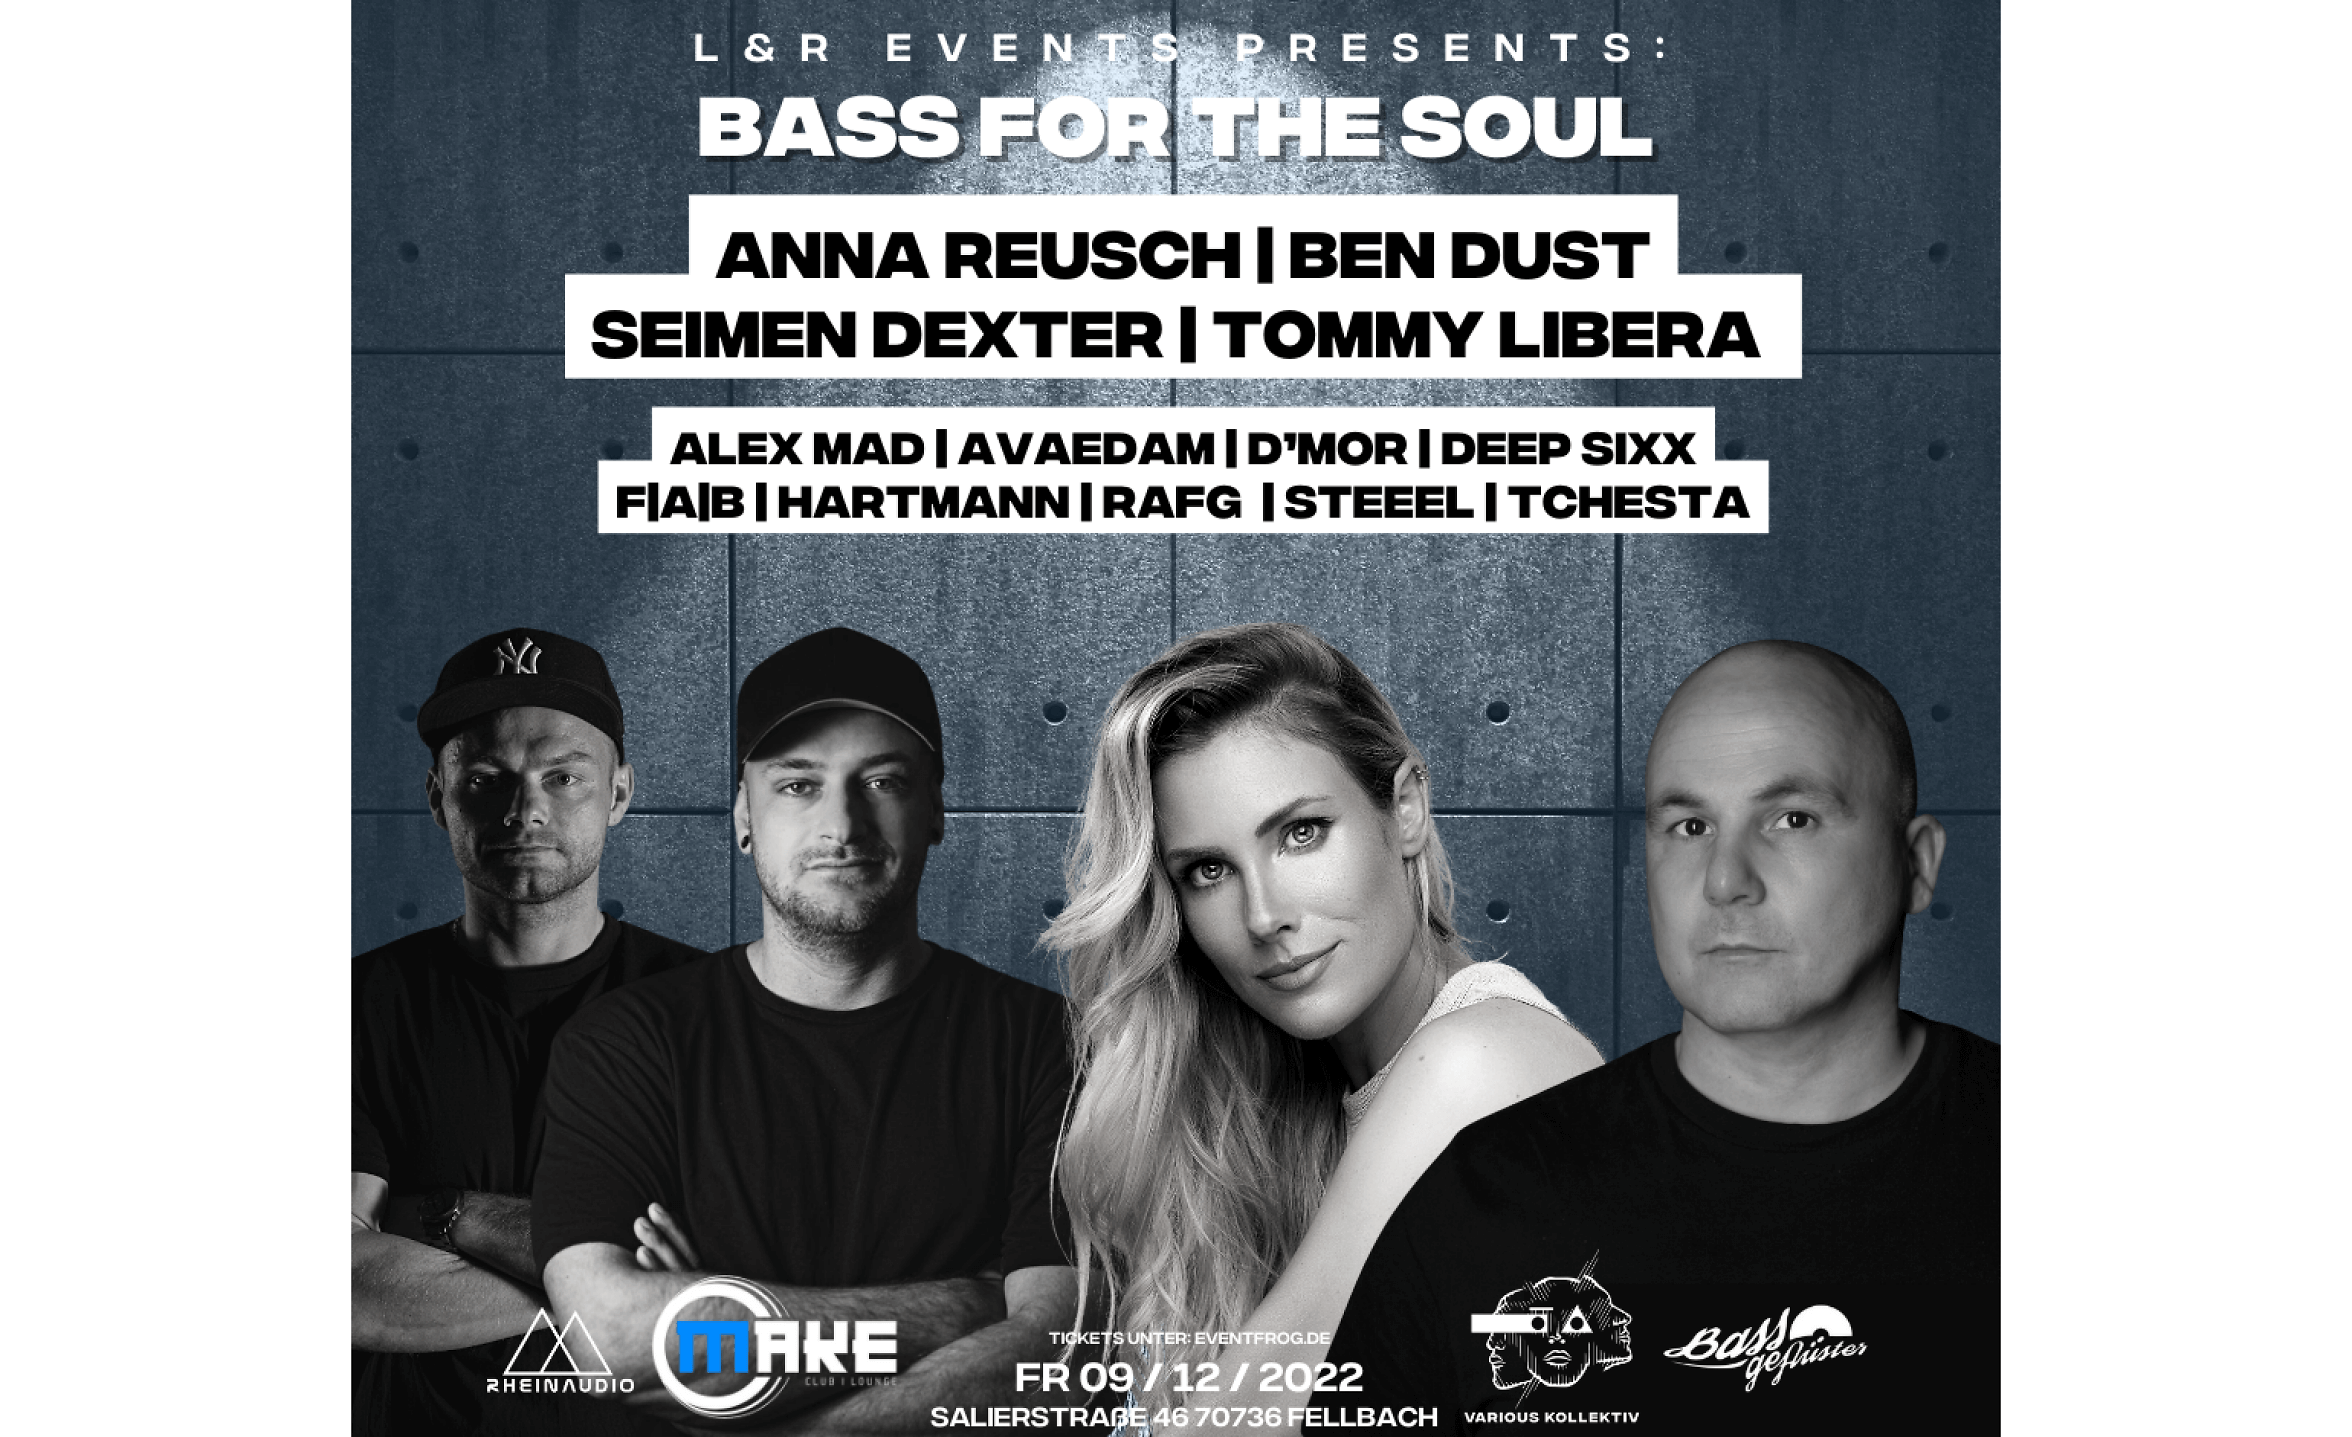 Event-Image for 'BASS FOR THE SOUL'